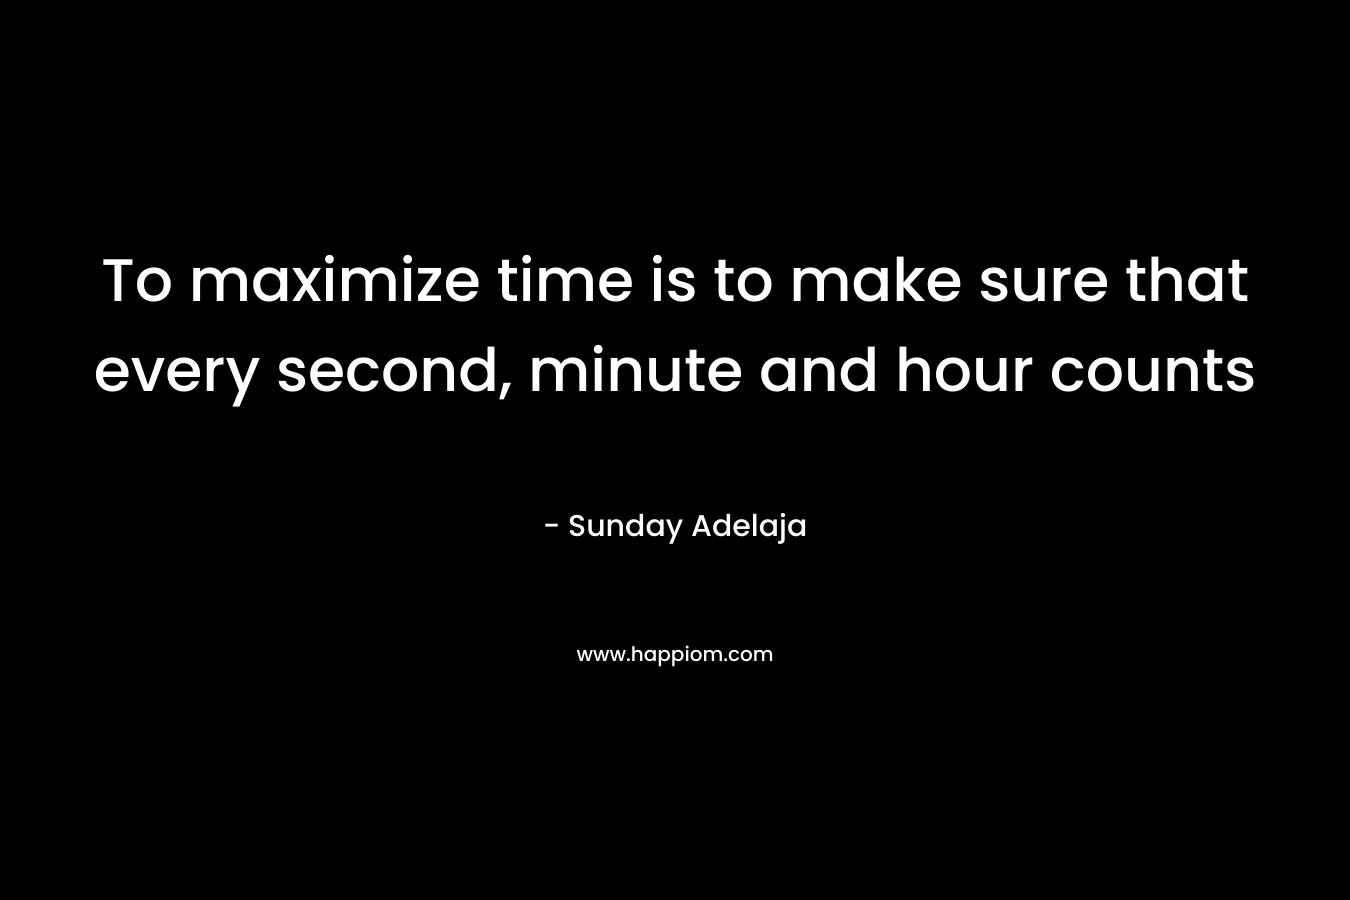 To maximize time is to make sure that every second, minute and hour counts